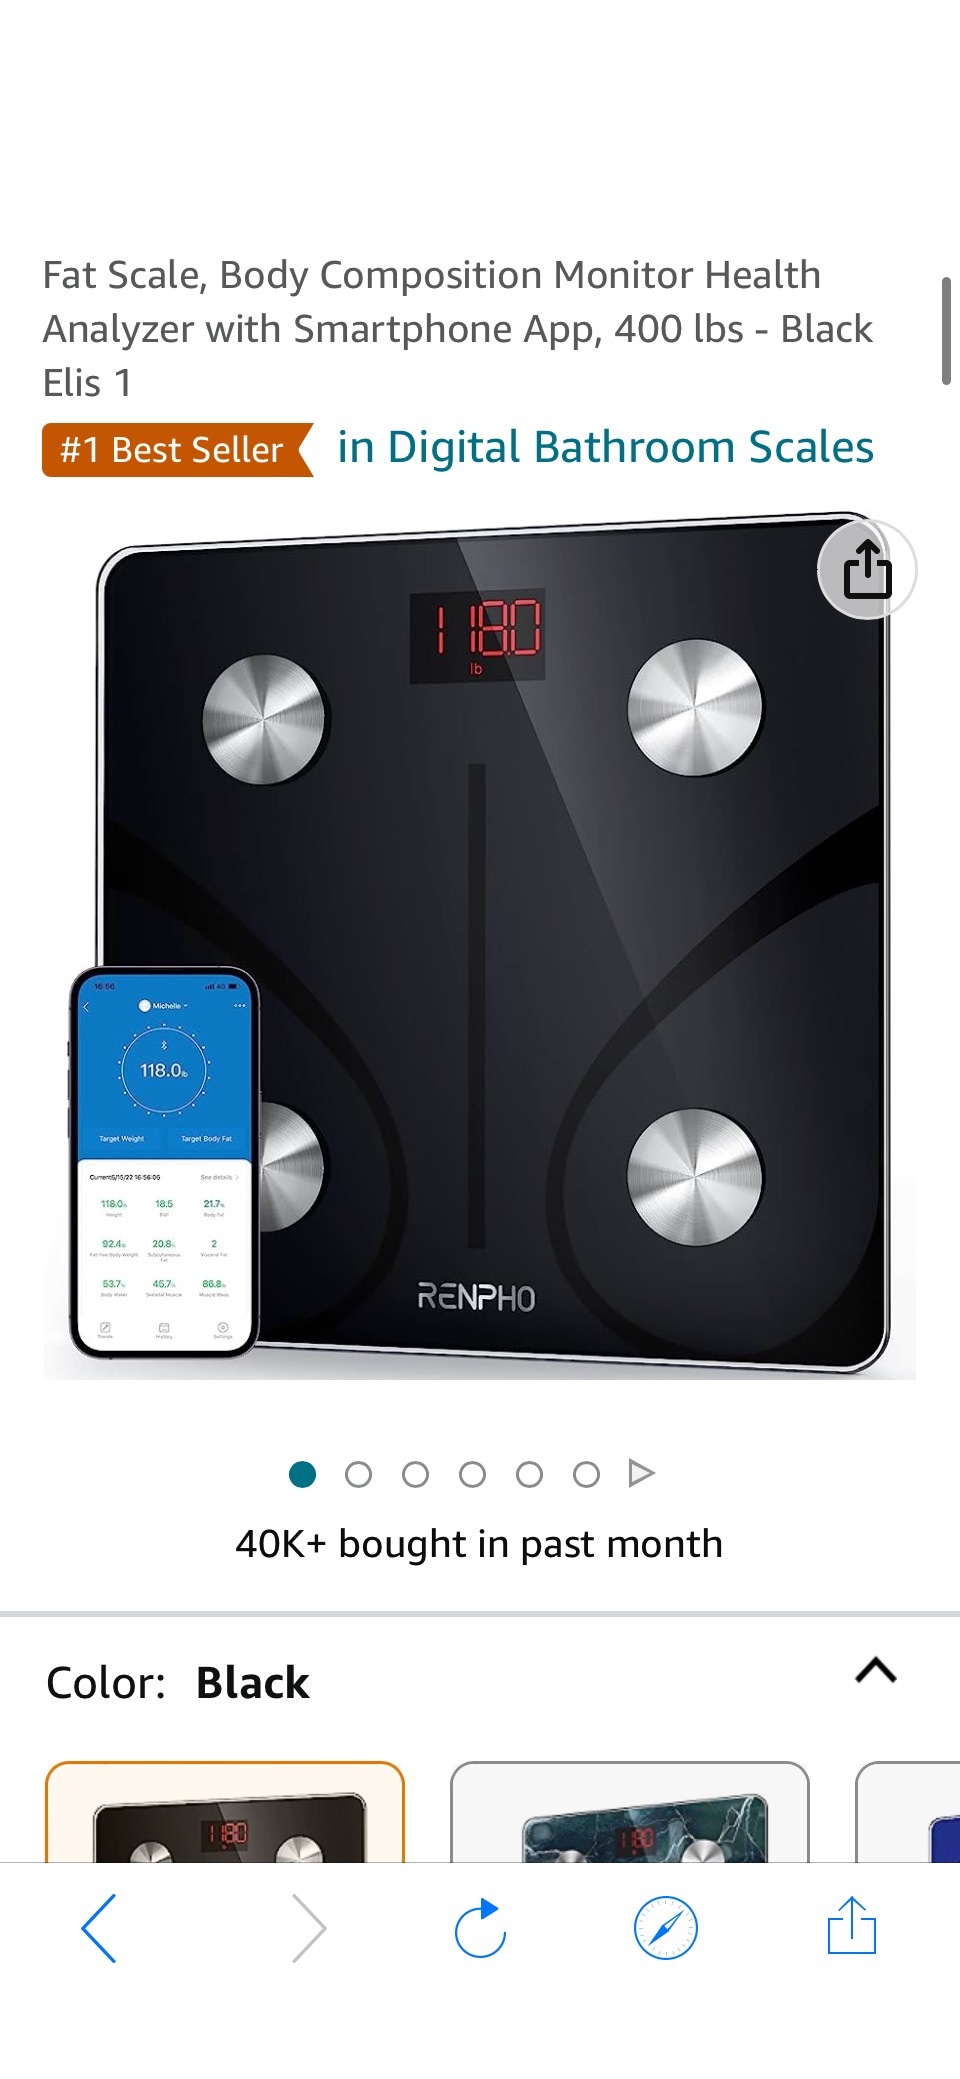 Amazon.com: RENPHO Smart Scale for Body Weight, Digital Bathroom Scale BMI Weighing Bluetooth Body Fat Scale, Body Composition原价34.99